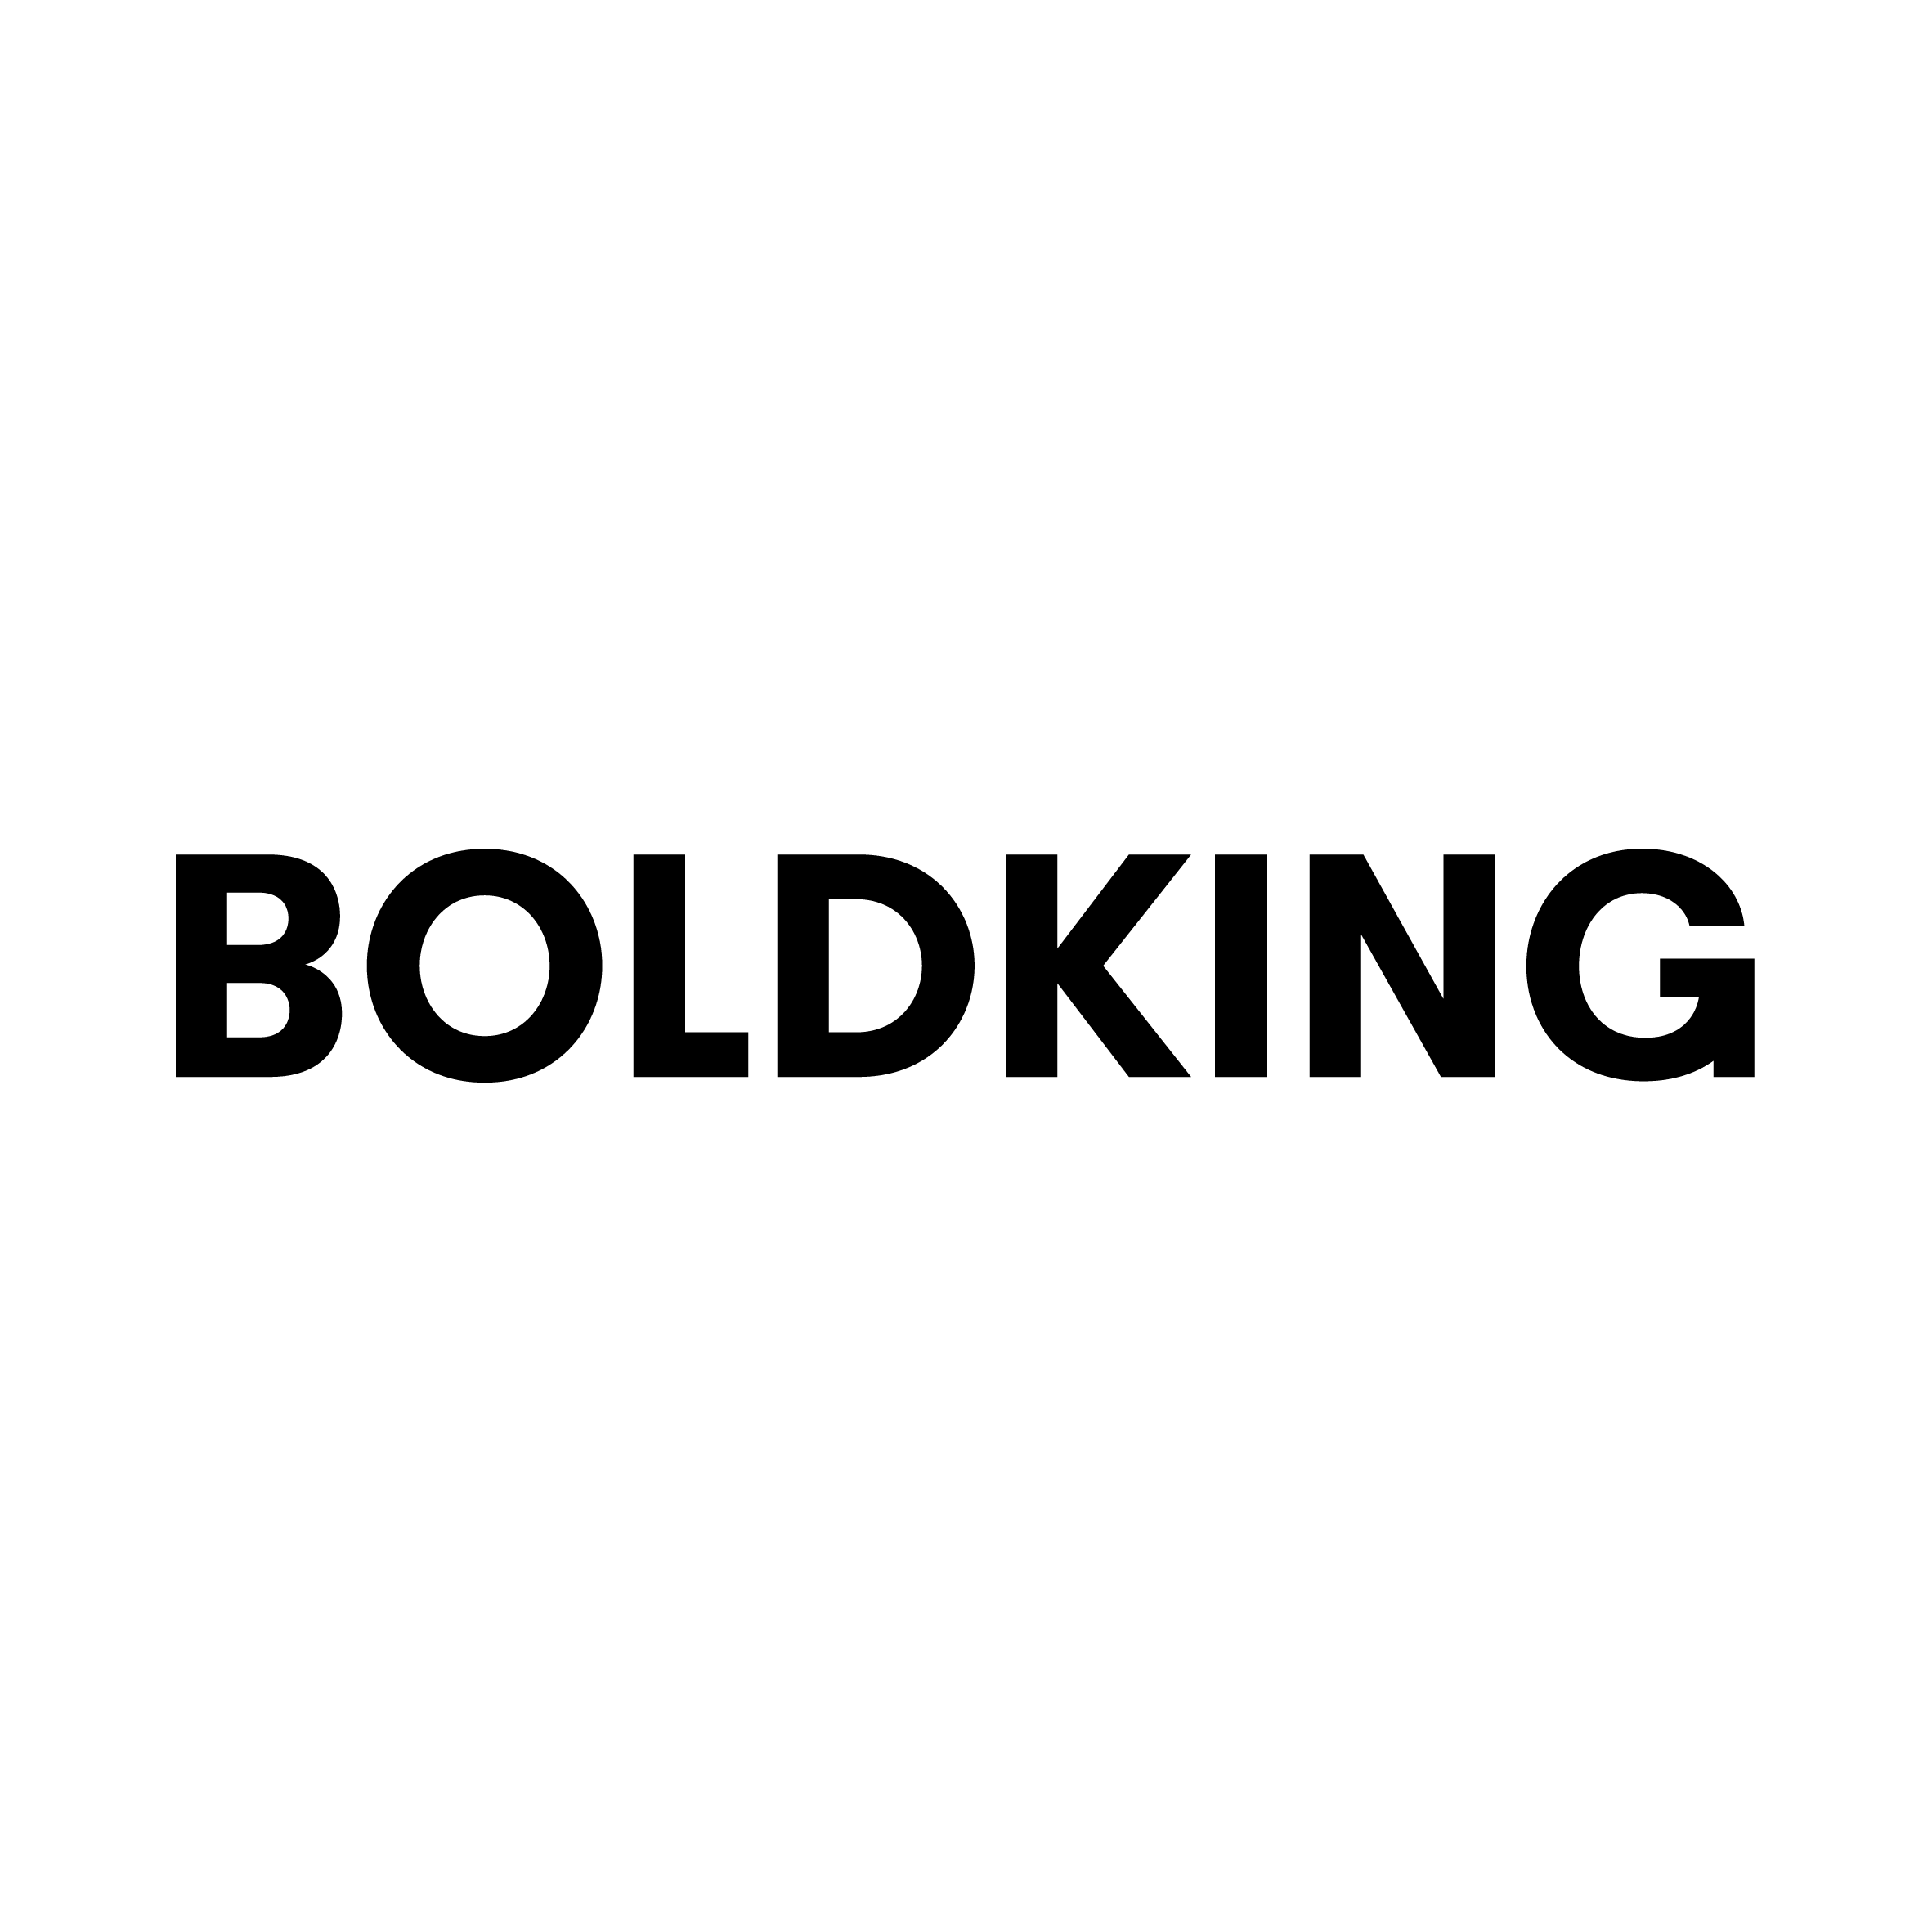 Stage Finance and Control BOLDKING